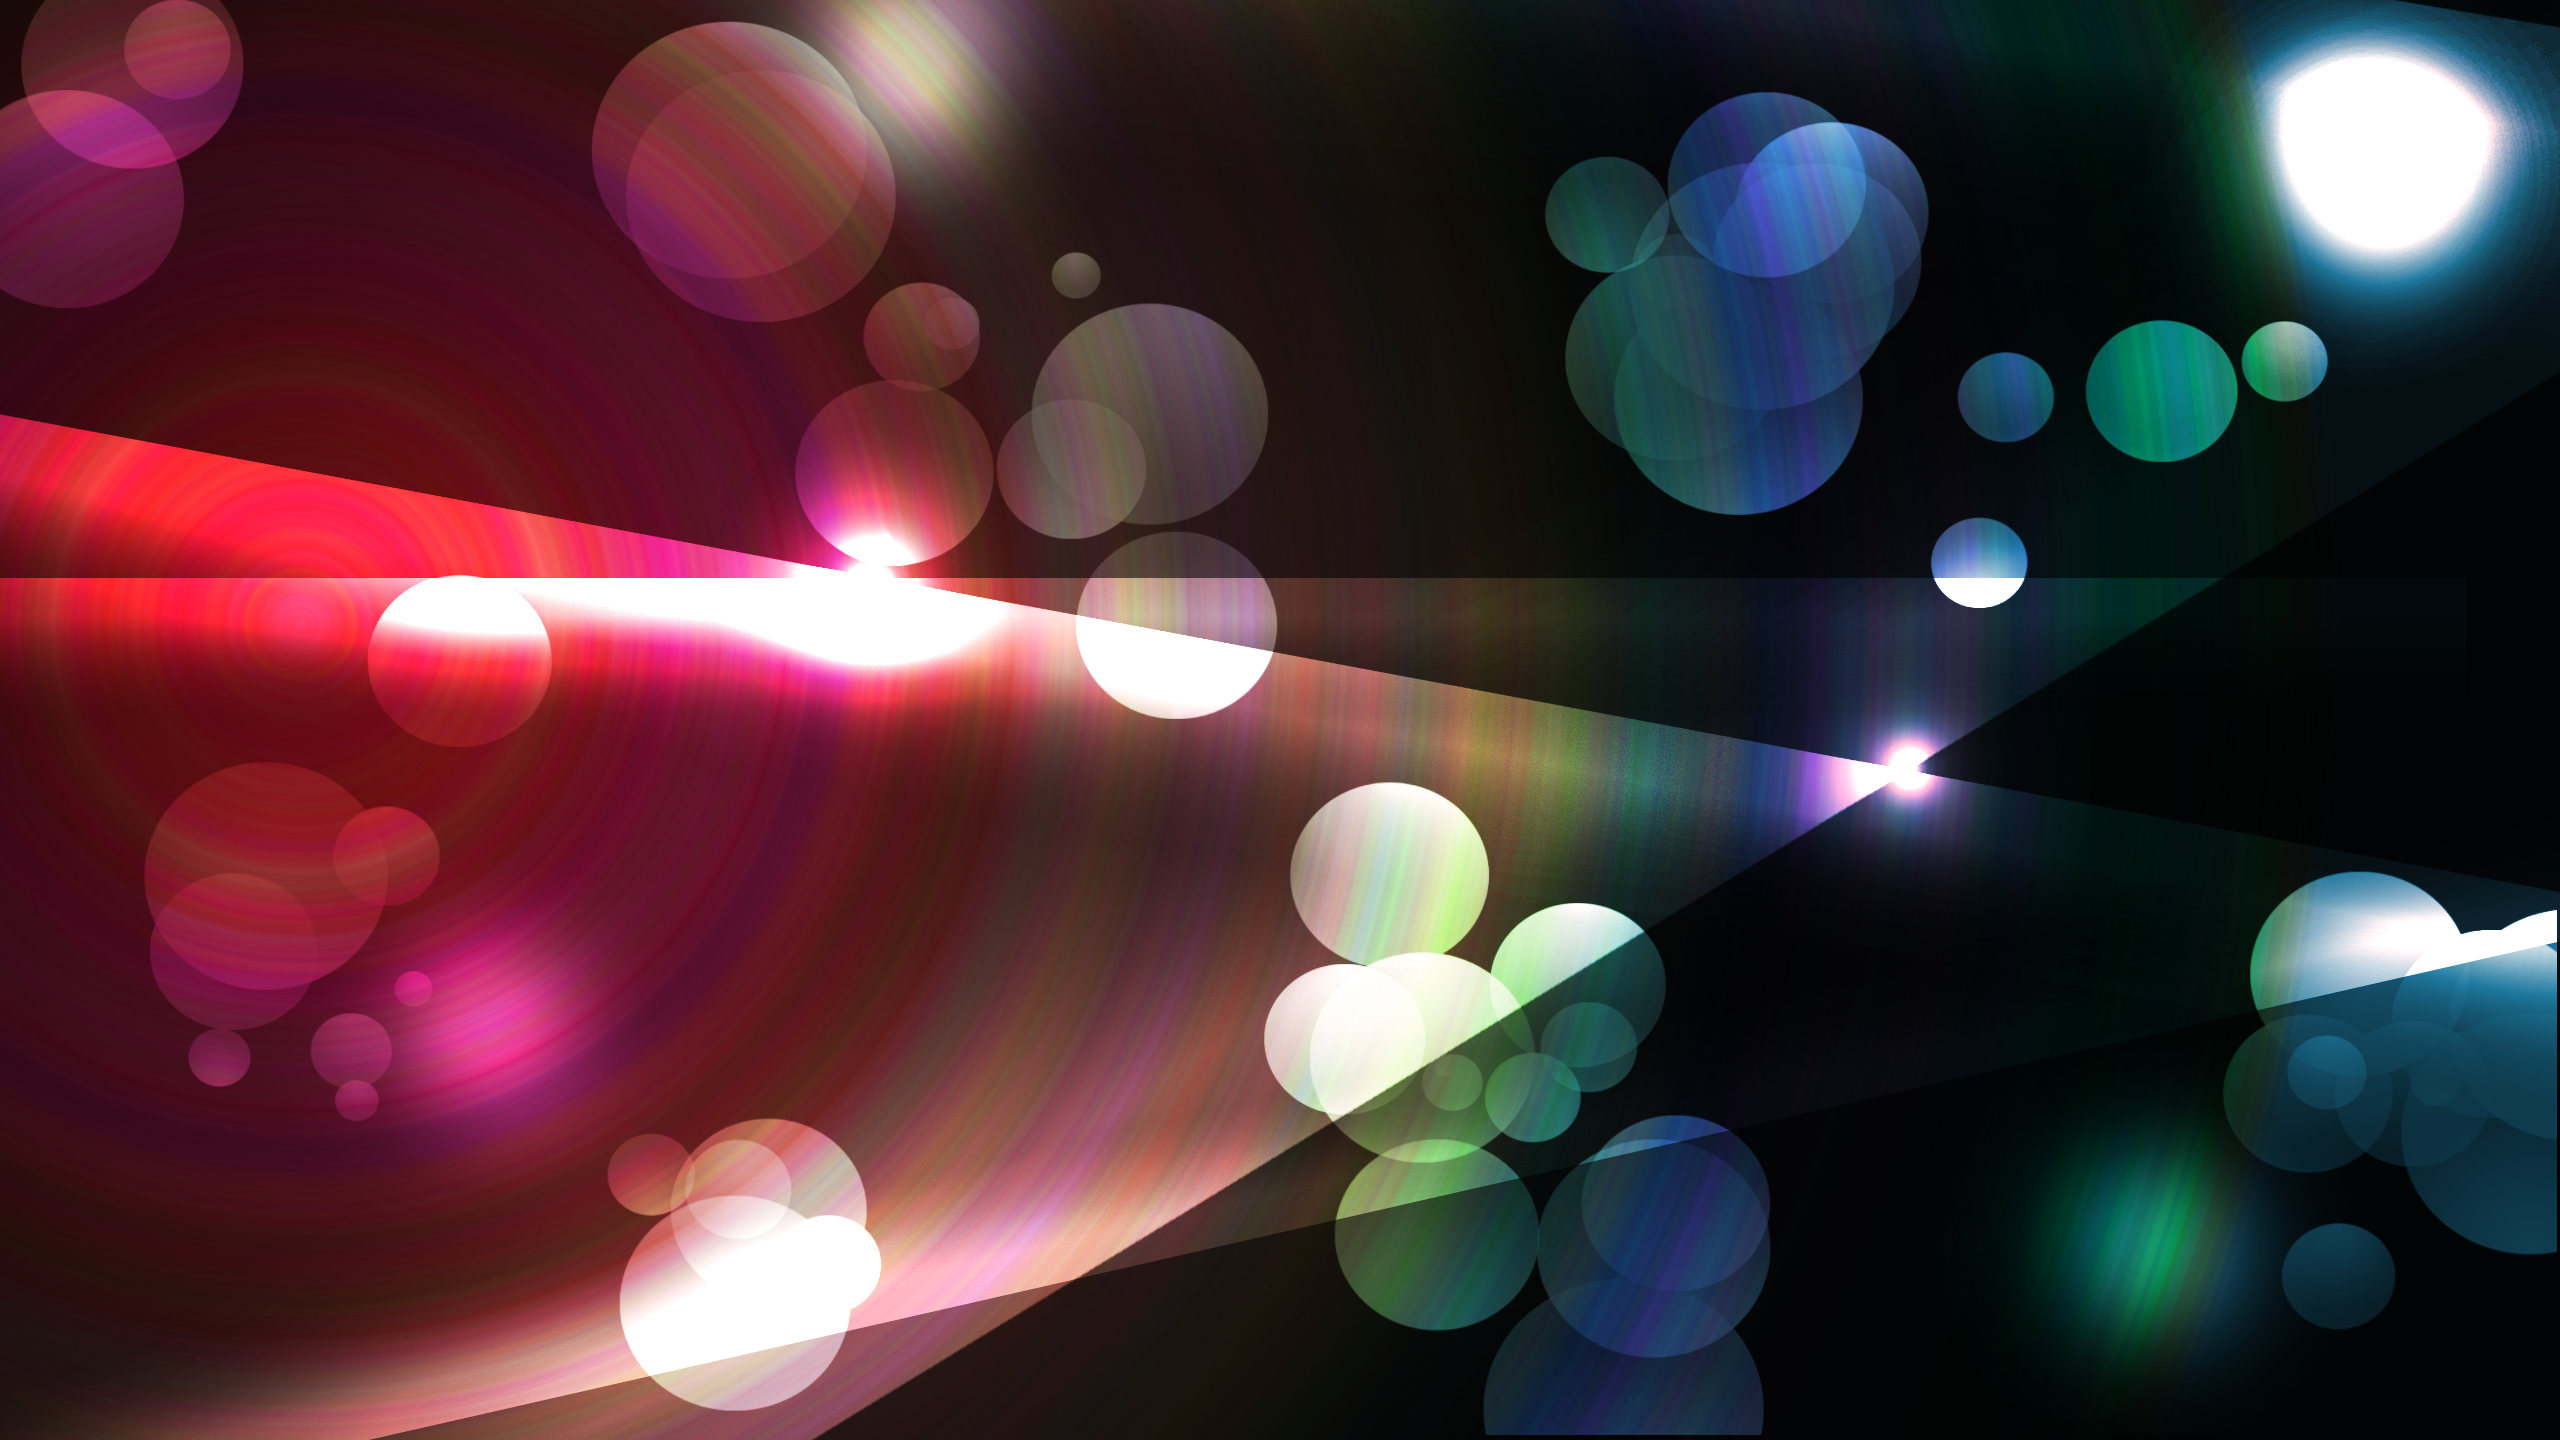 Abstract Light HD Wallpaper | Background Image